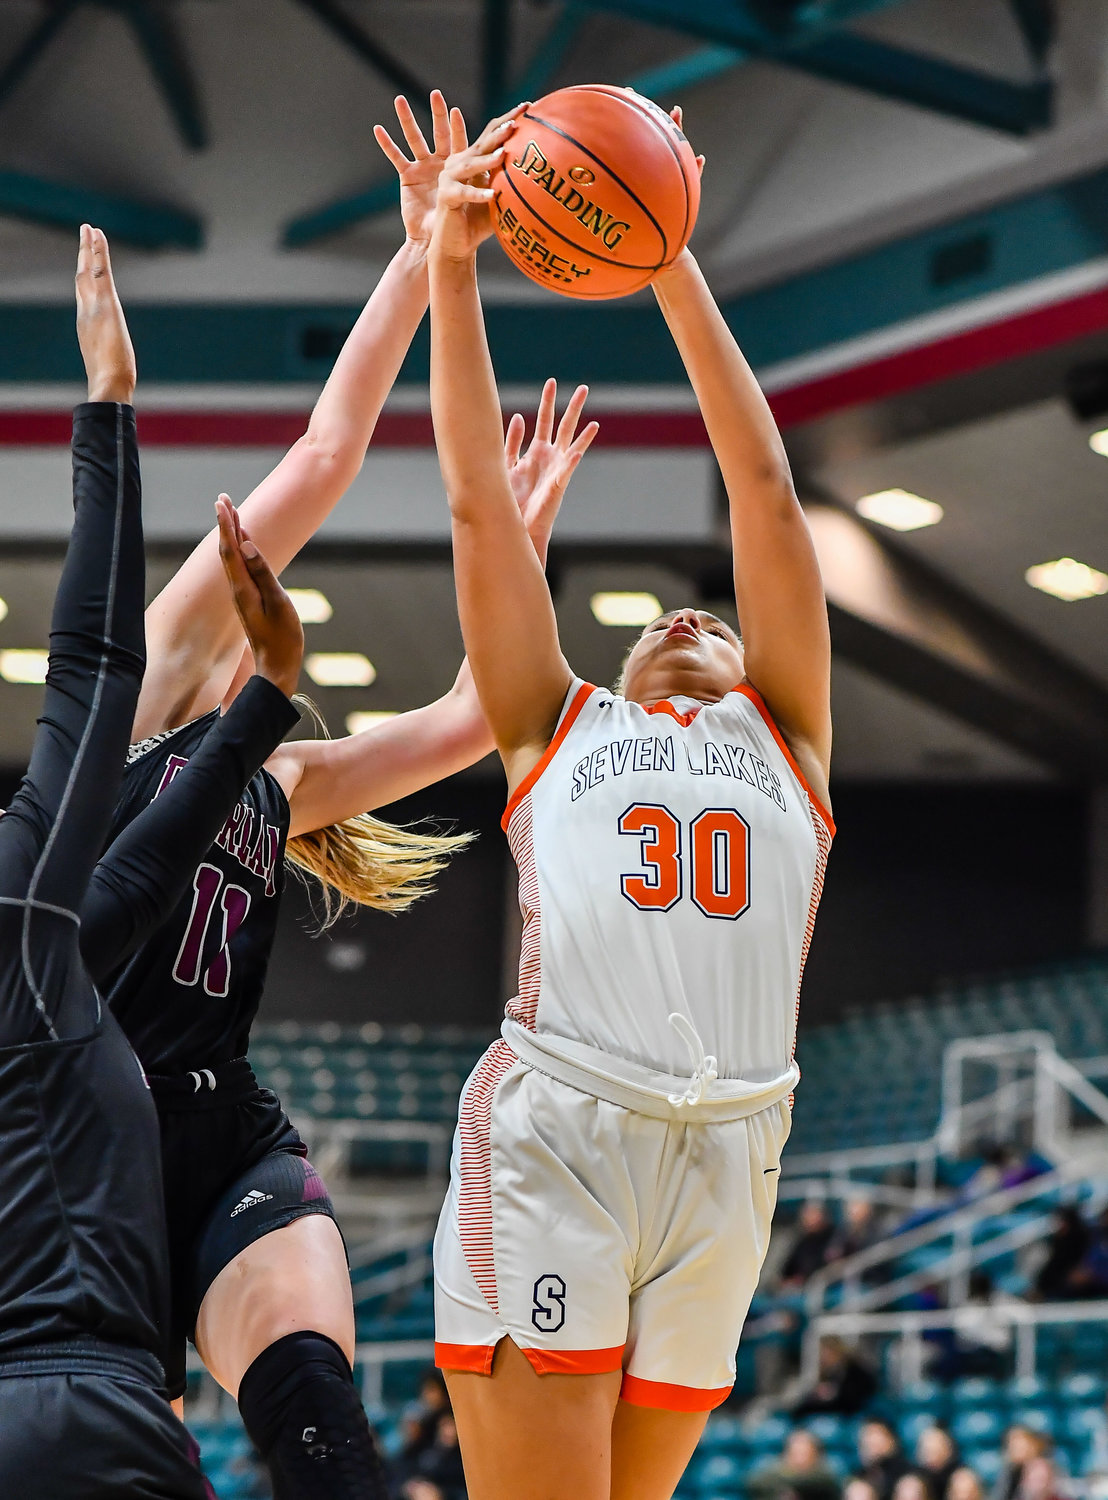 Katy Tx. Feb 25, 2022: Seven Lakes Justice Carlton #30 pulls down the rebound during the Regional SemiFinal playoff game, Seven Lakes vs Pearland at the Merrell Center. (Photo by Mark Goodman / Katy Times)